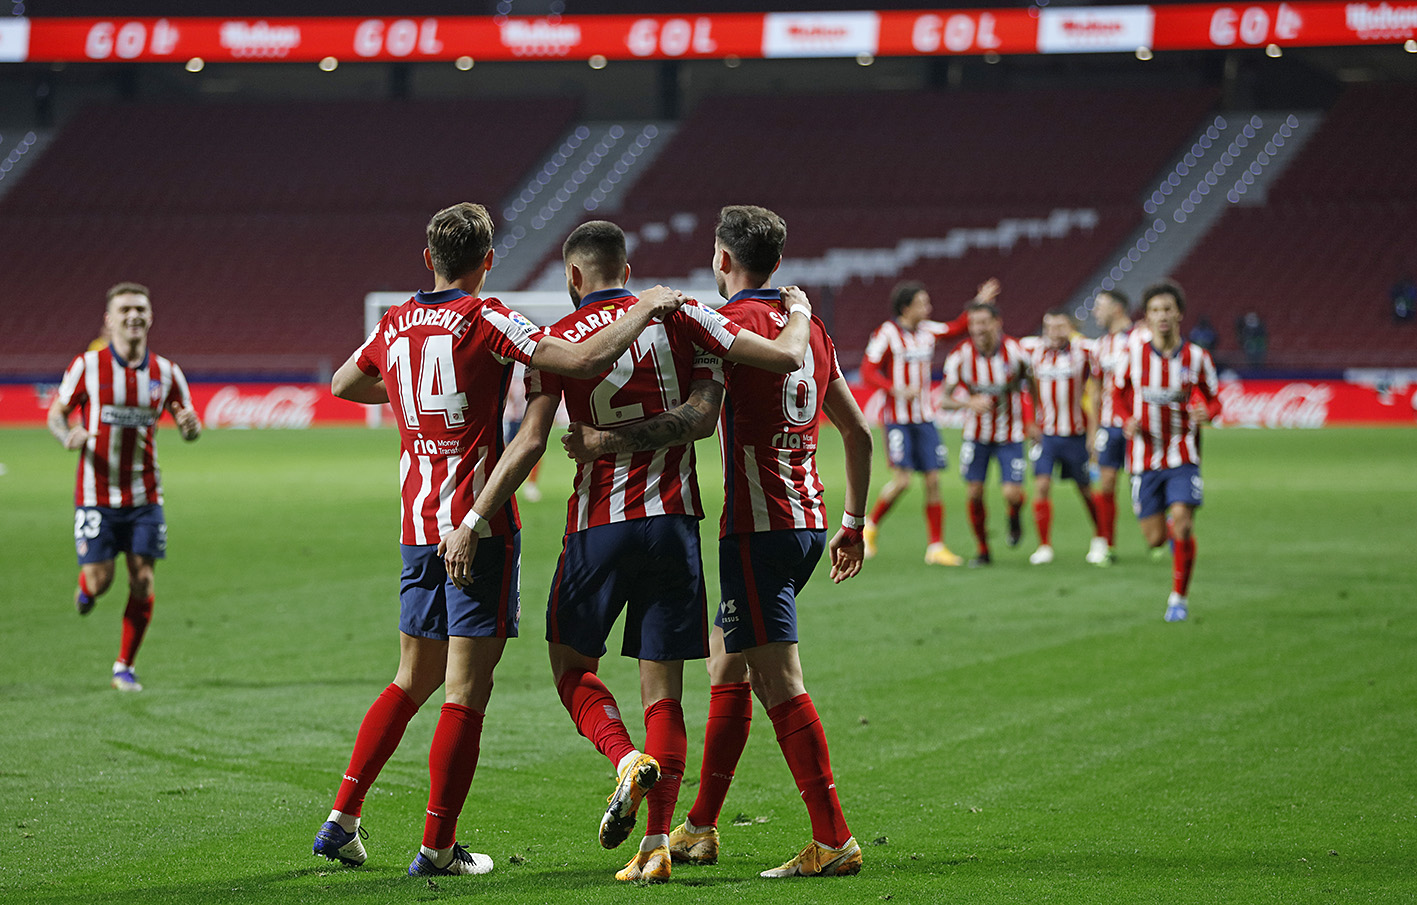 Atletico Madrid surprised by the Barcelona put in front of them